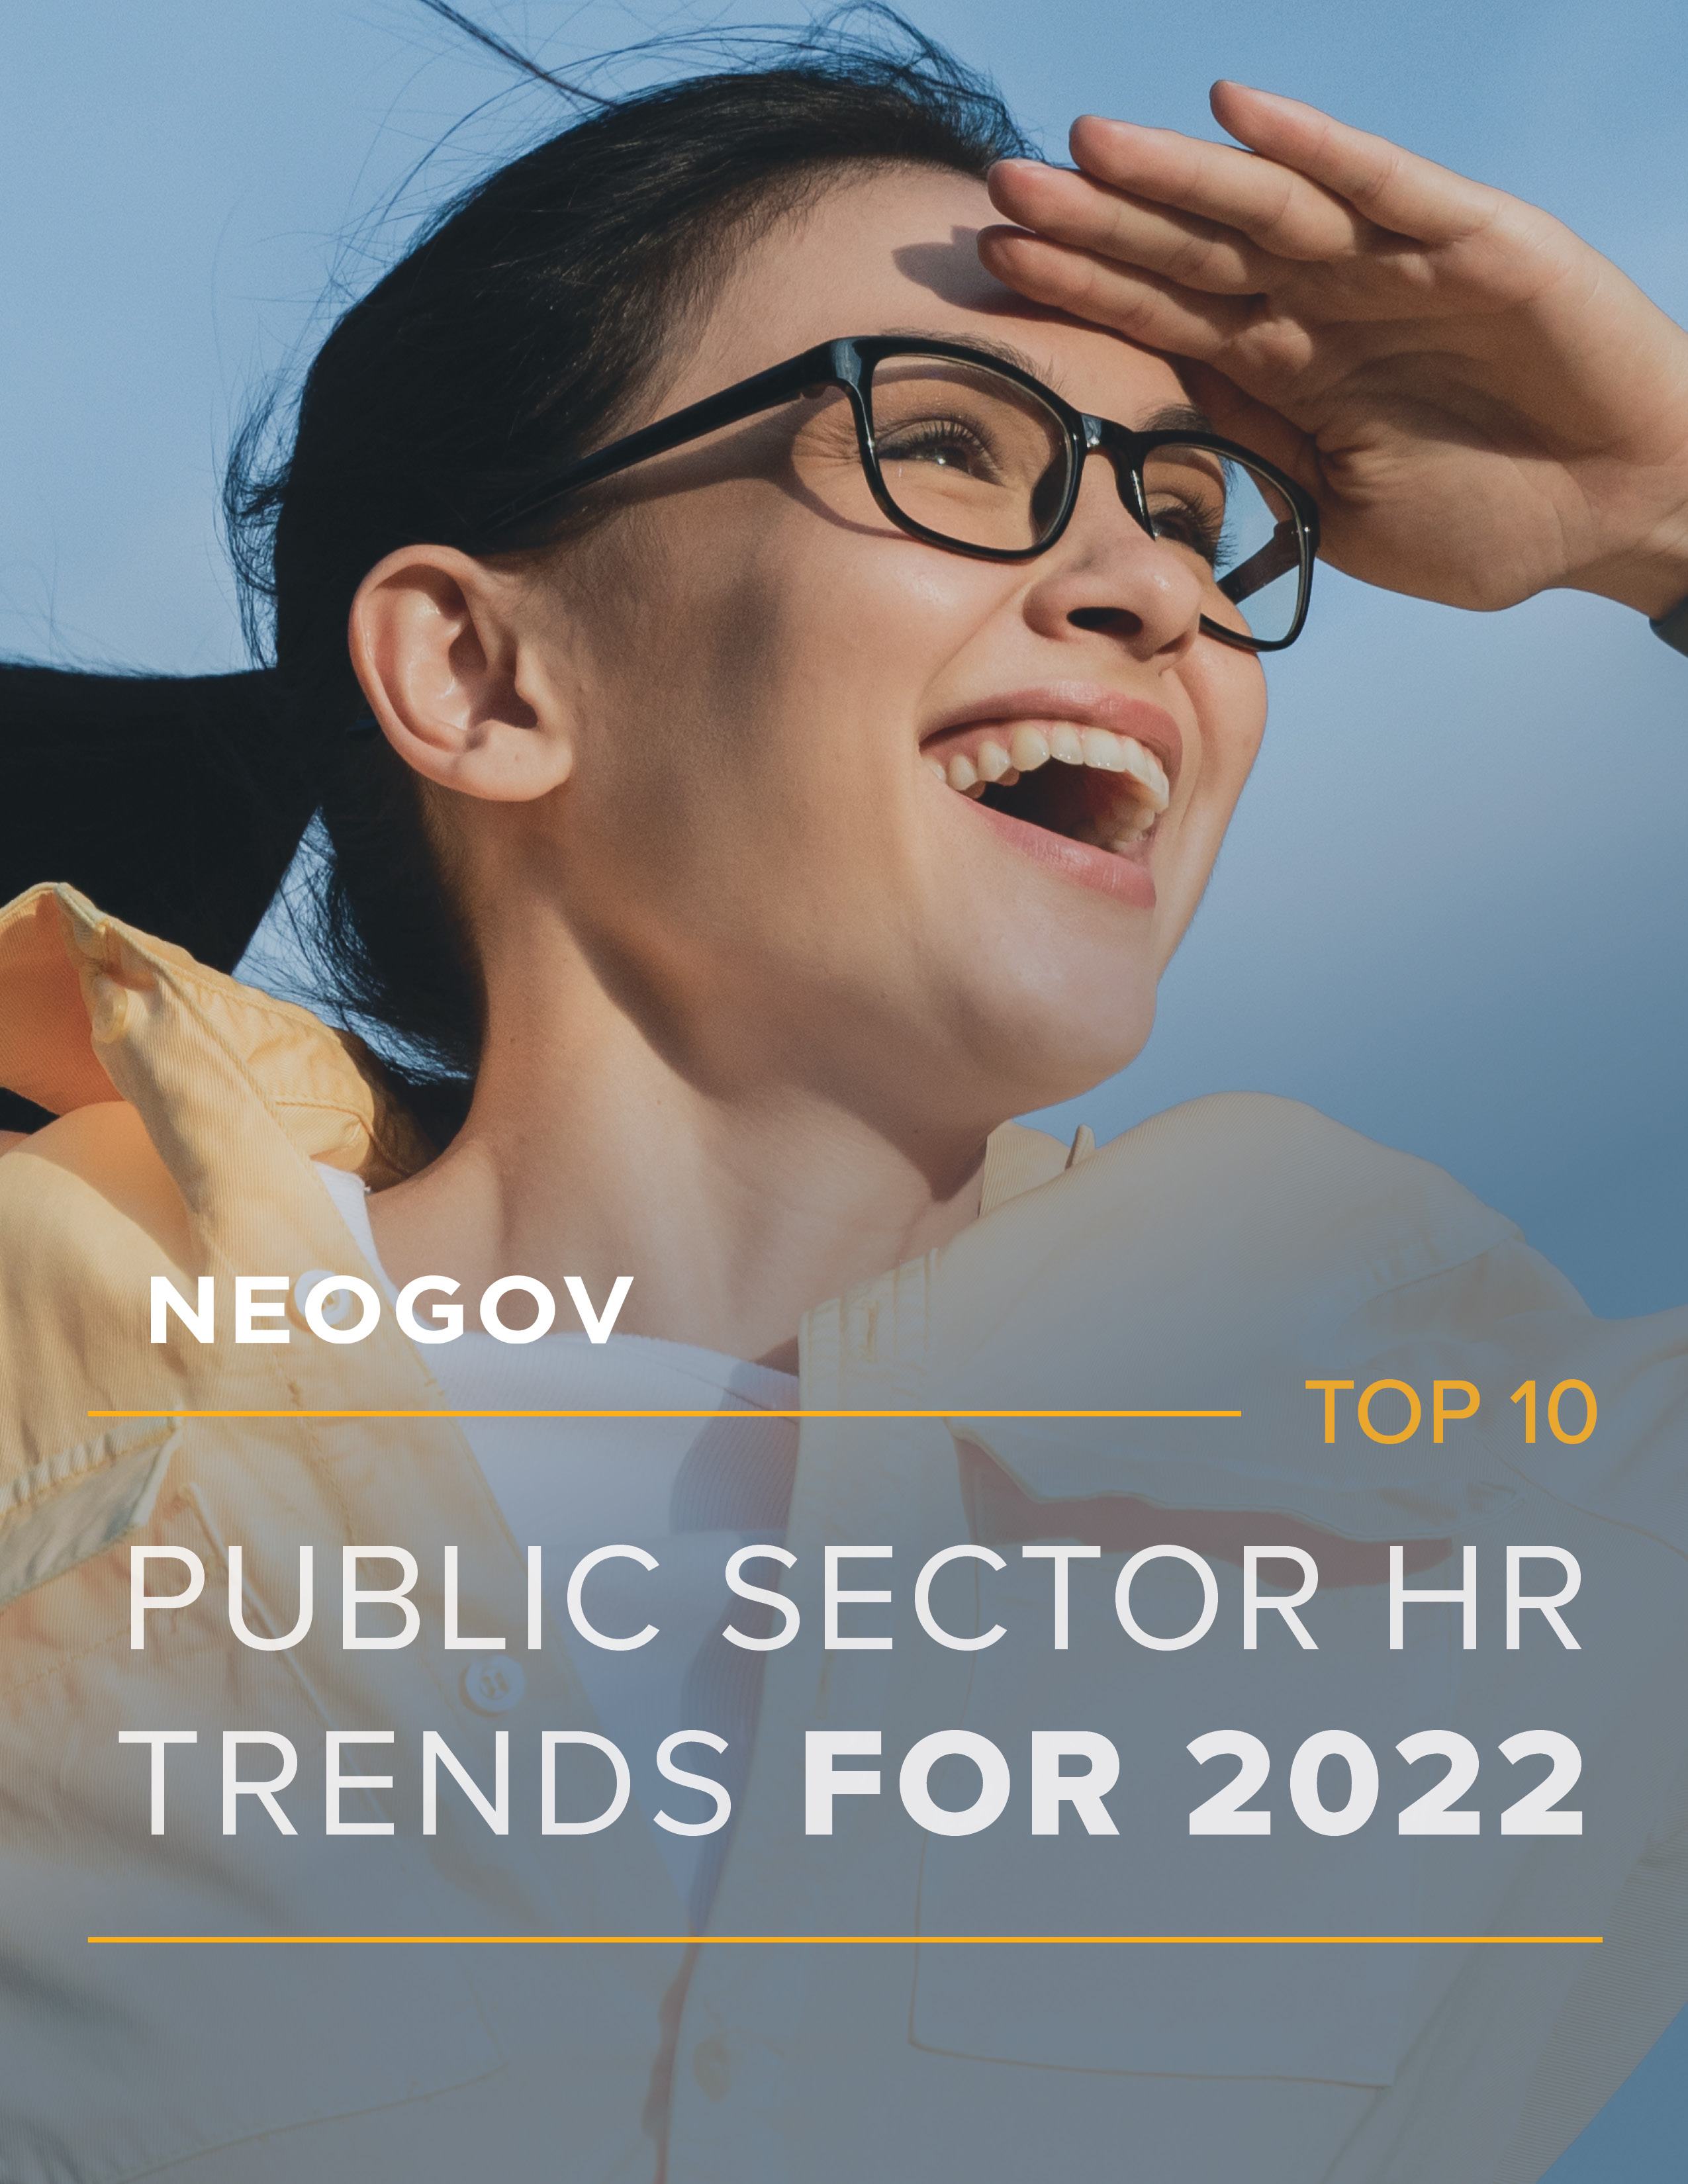 Top 10 Public Sector HR Trends for 2022